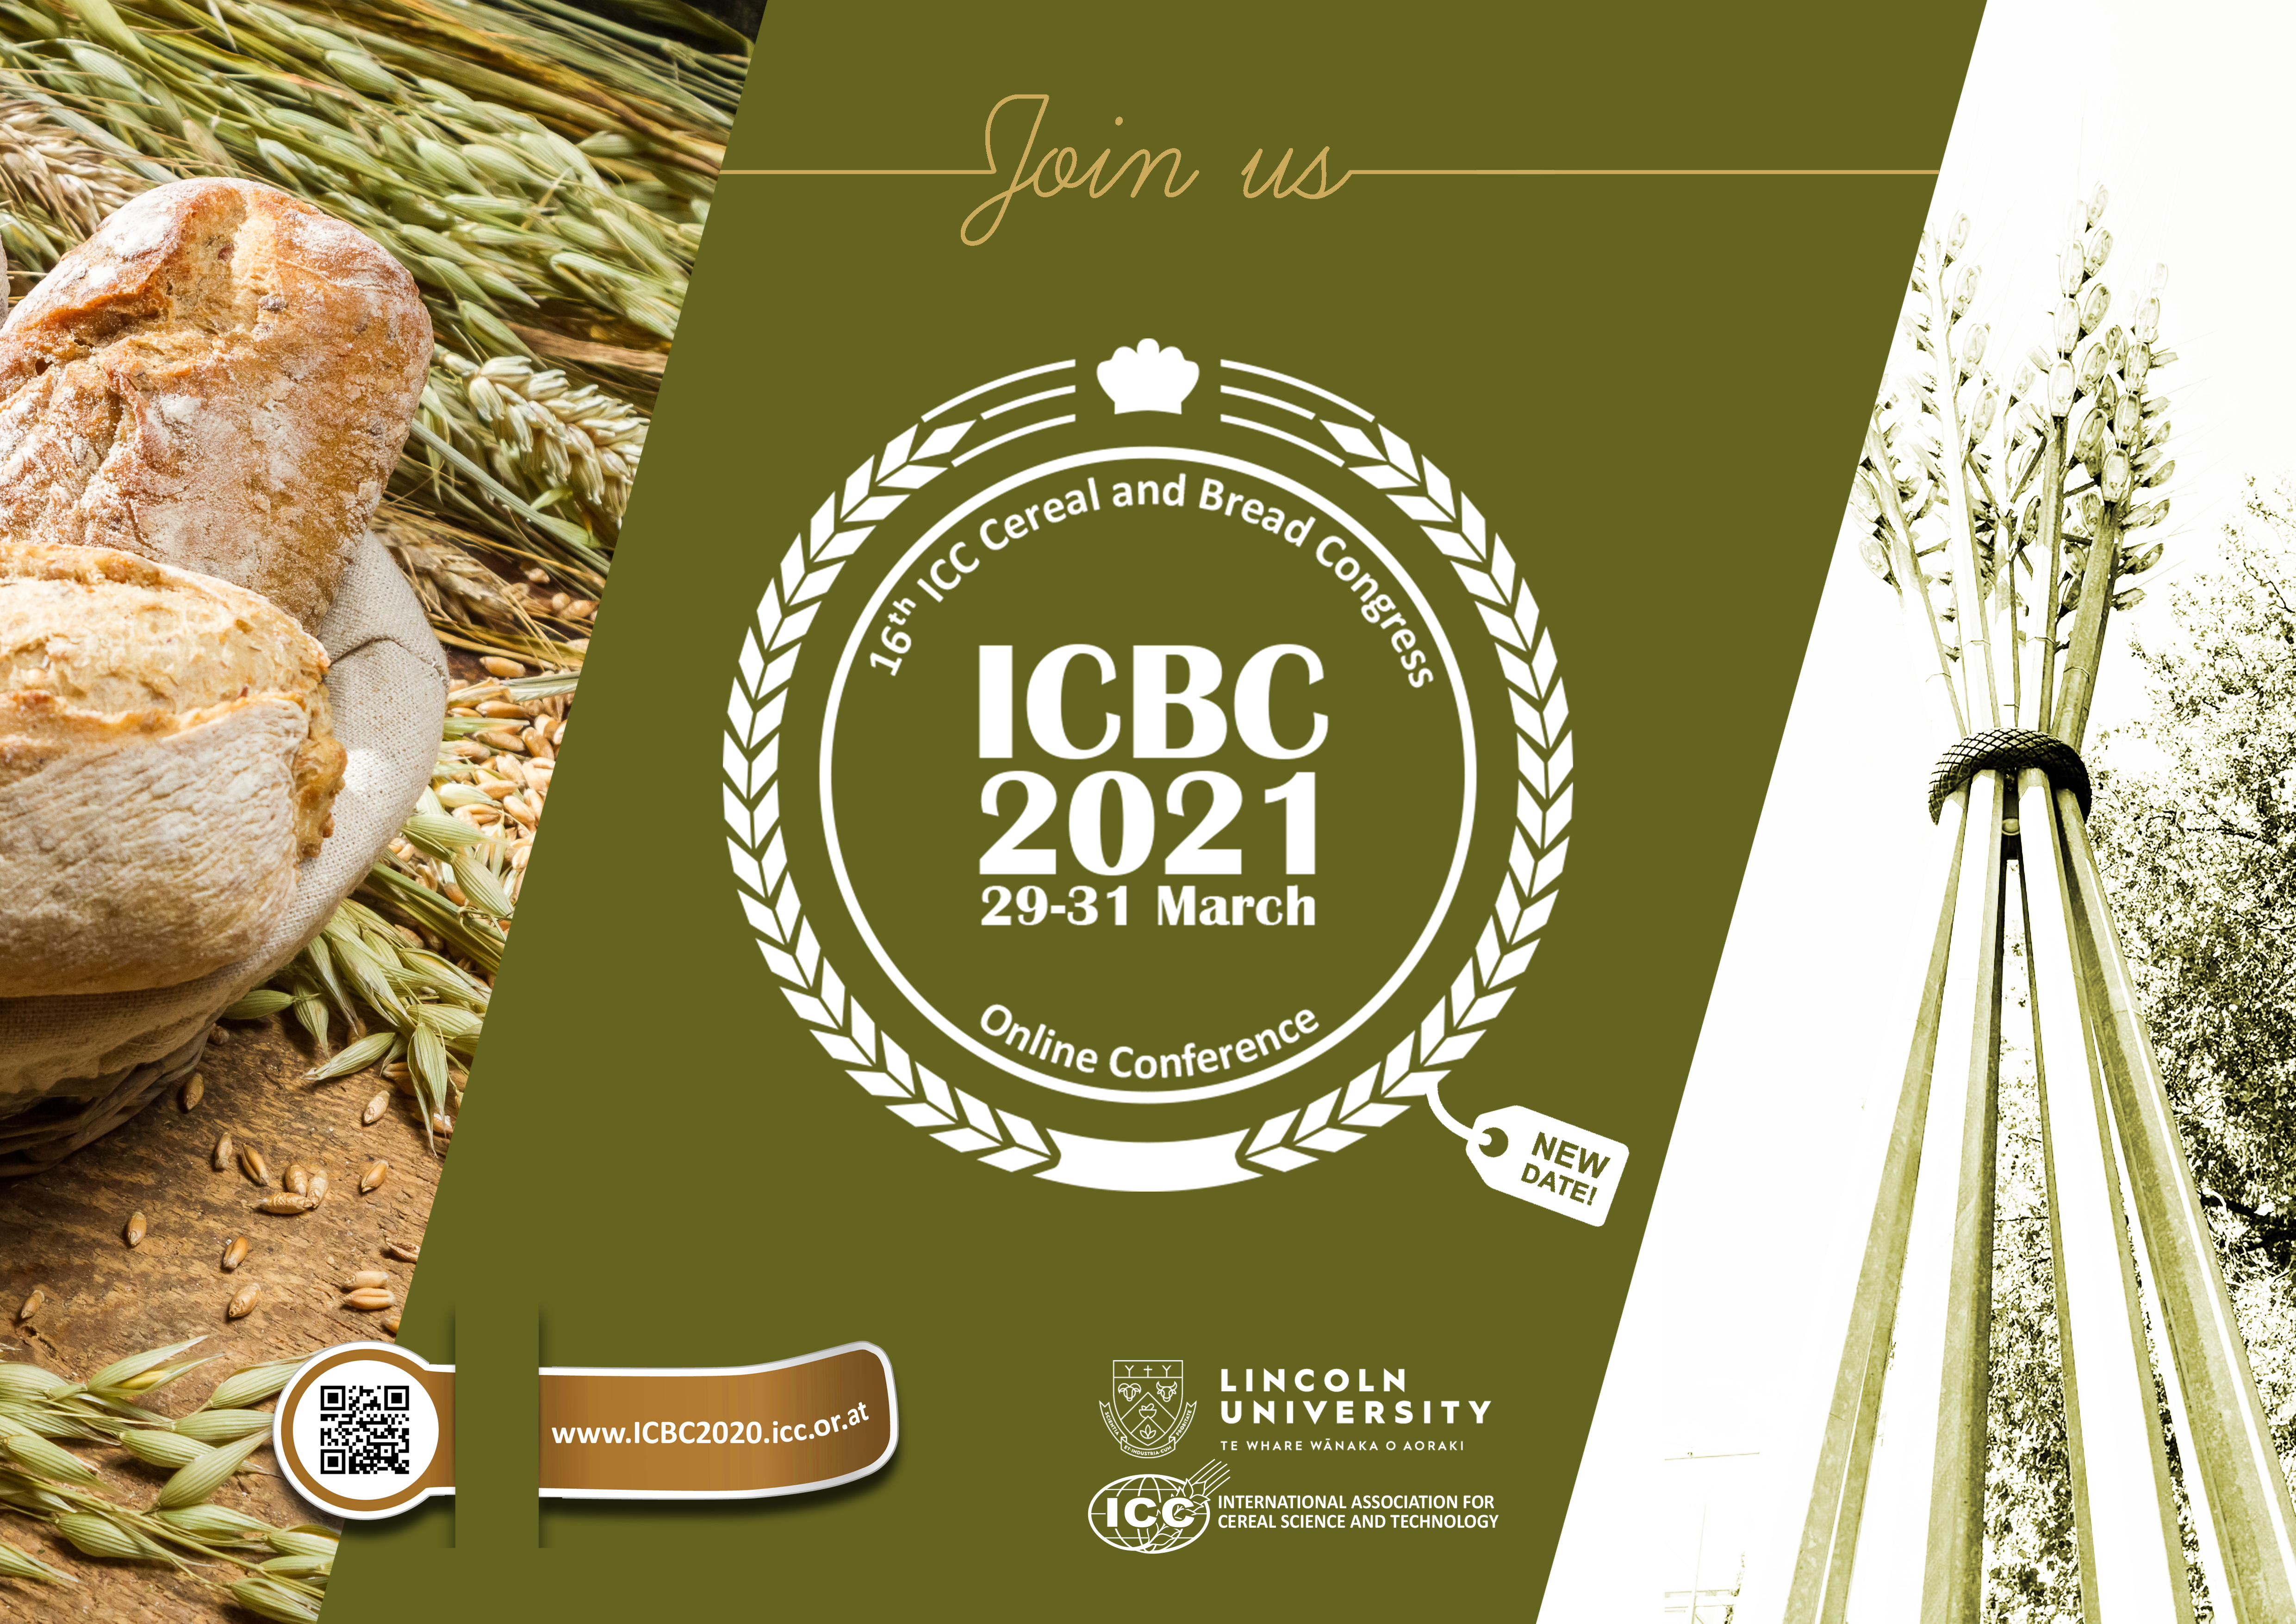 ICBC2021 - Submit your poster abstract and register!